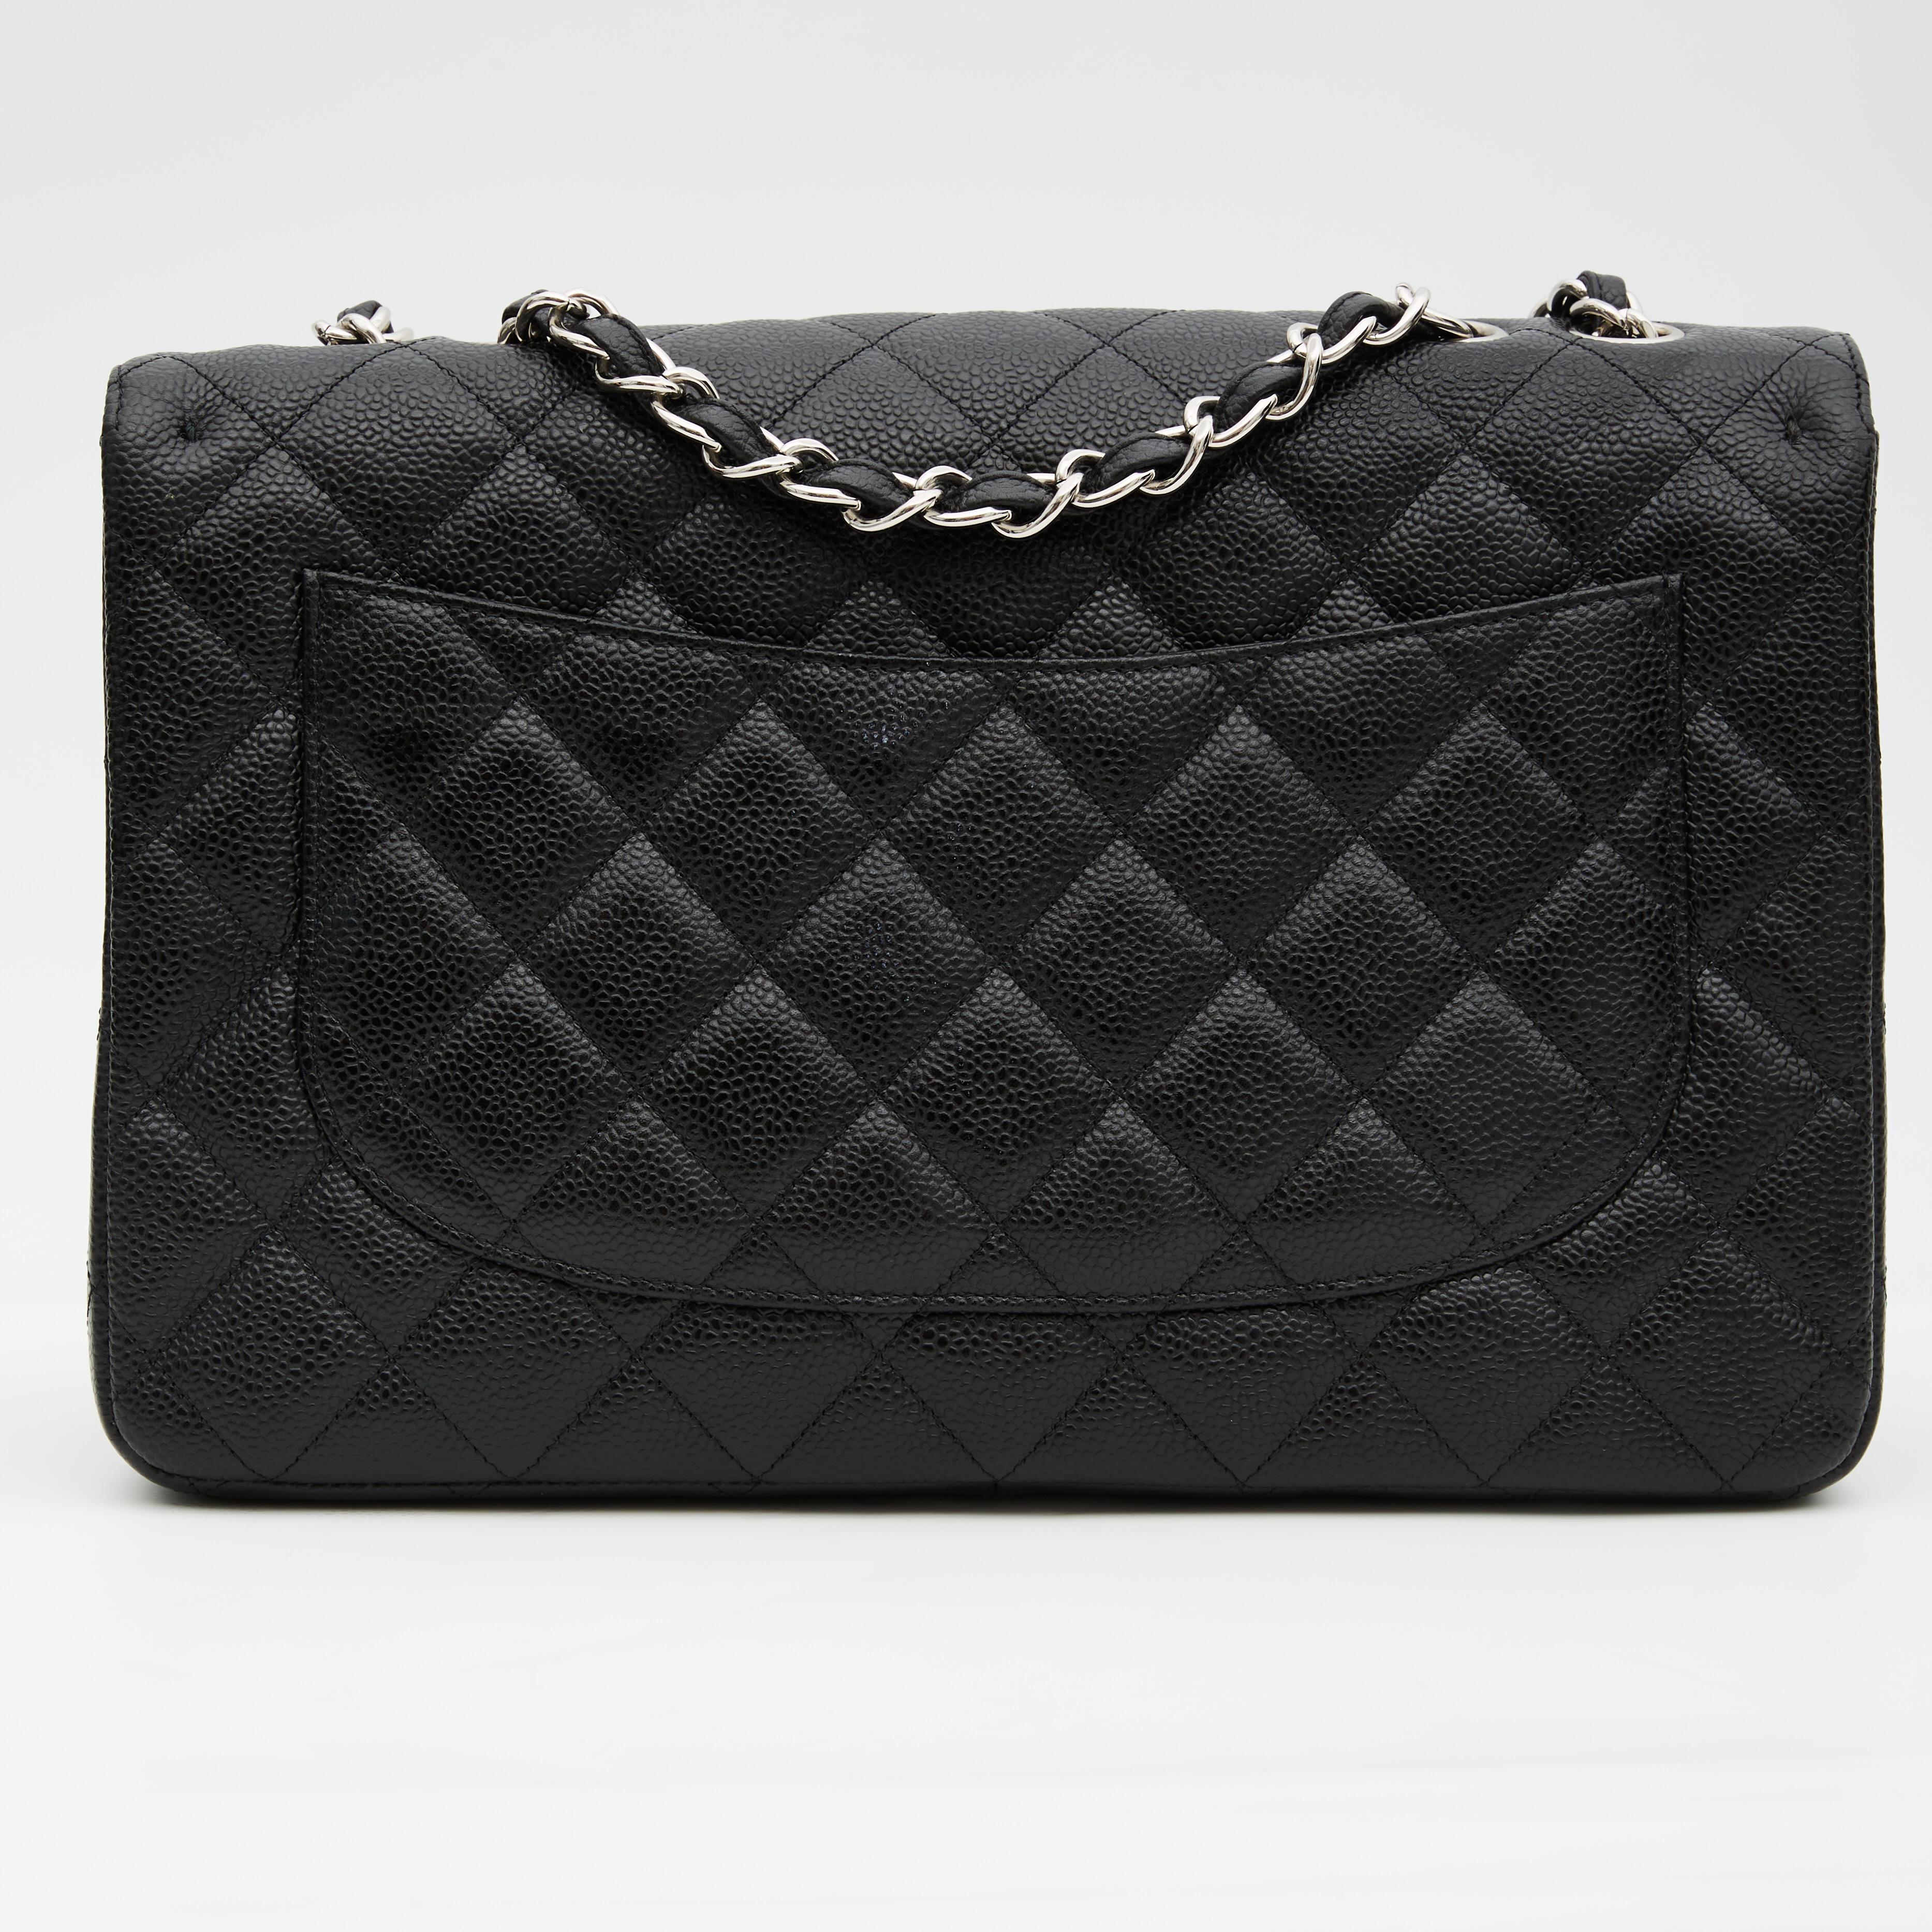 This shoulder bag is made of caviar textured leather in black with diamond quilted stitching. The bag features a chain interlaced with leather shoulder straps, a rear patch pocket, a front flap with a silver CC turn lock and a black leather interior